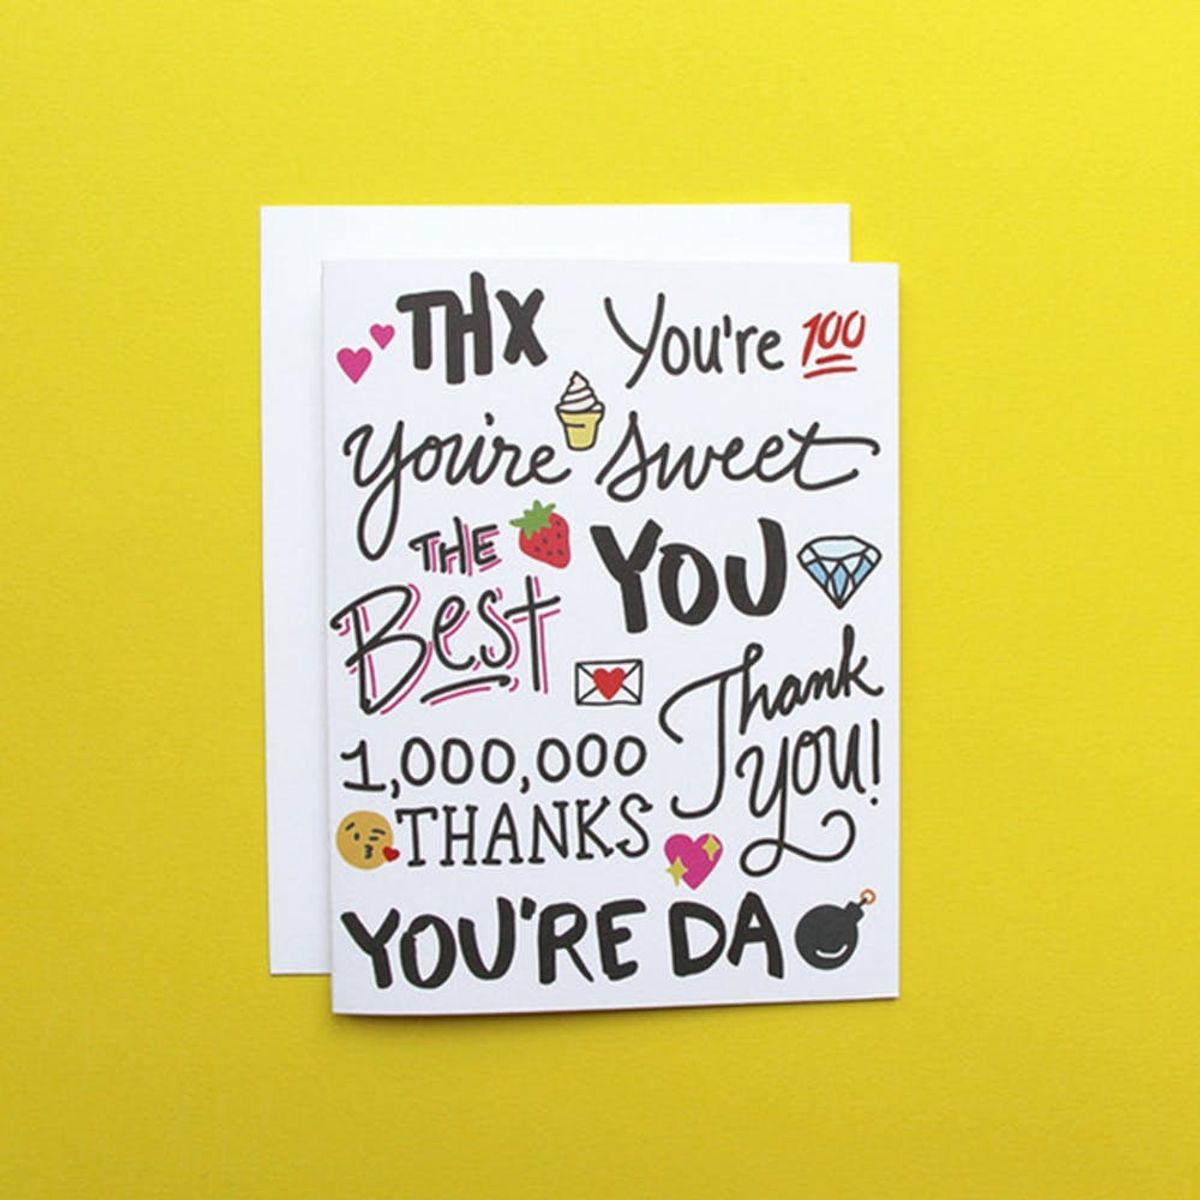 10 Greeting Cards to Send Out Just Because